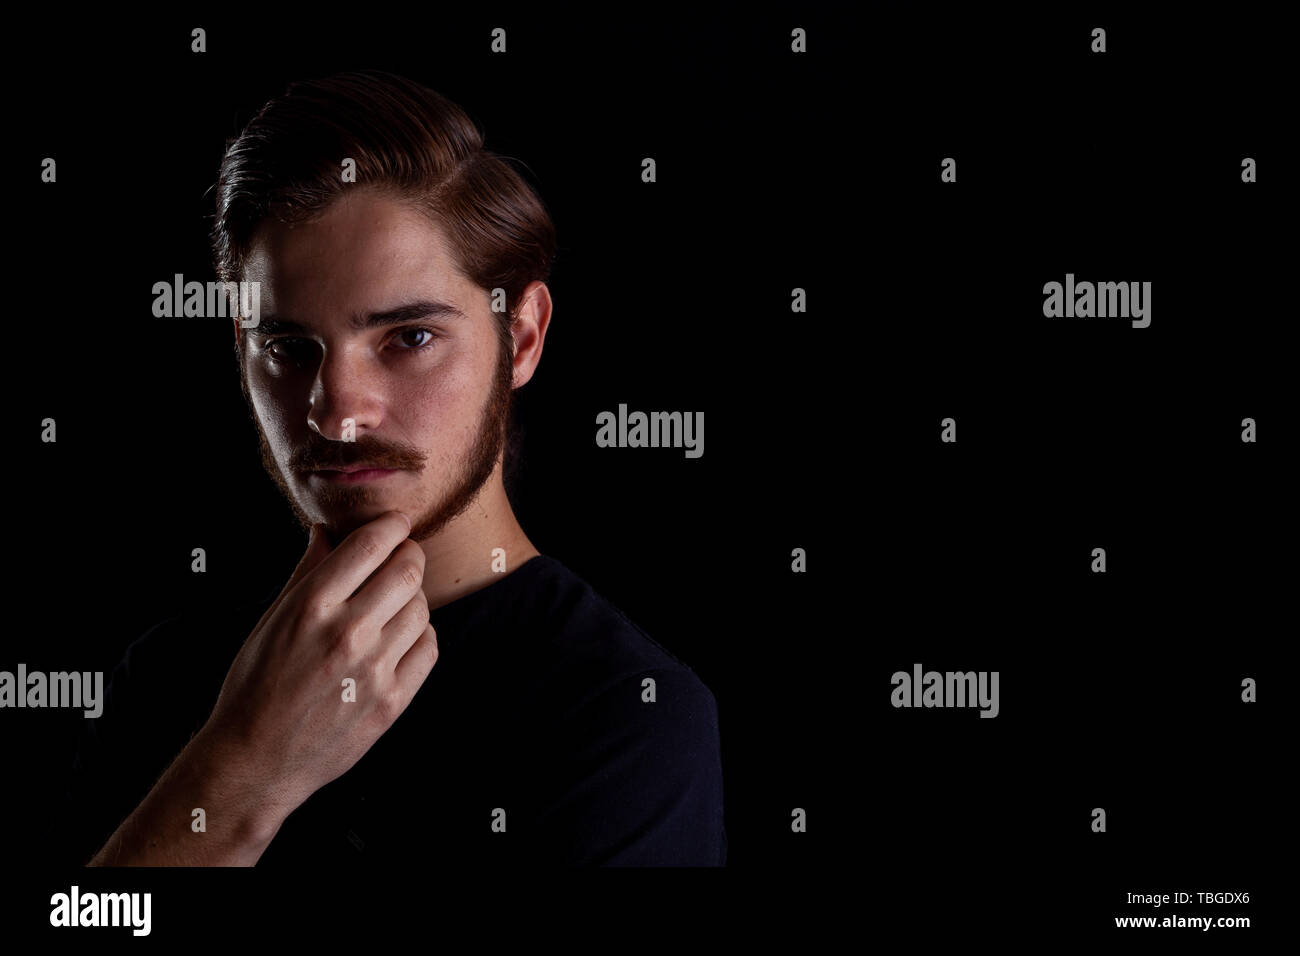 Young adult male looking sinister or contemplative. Color expressive dark and moody series. Concept image for corporate scheming. Hand under chin. Stock Photo